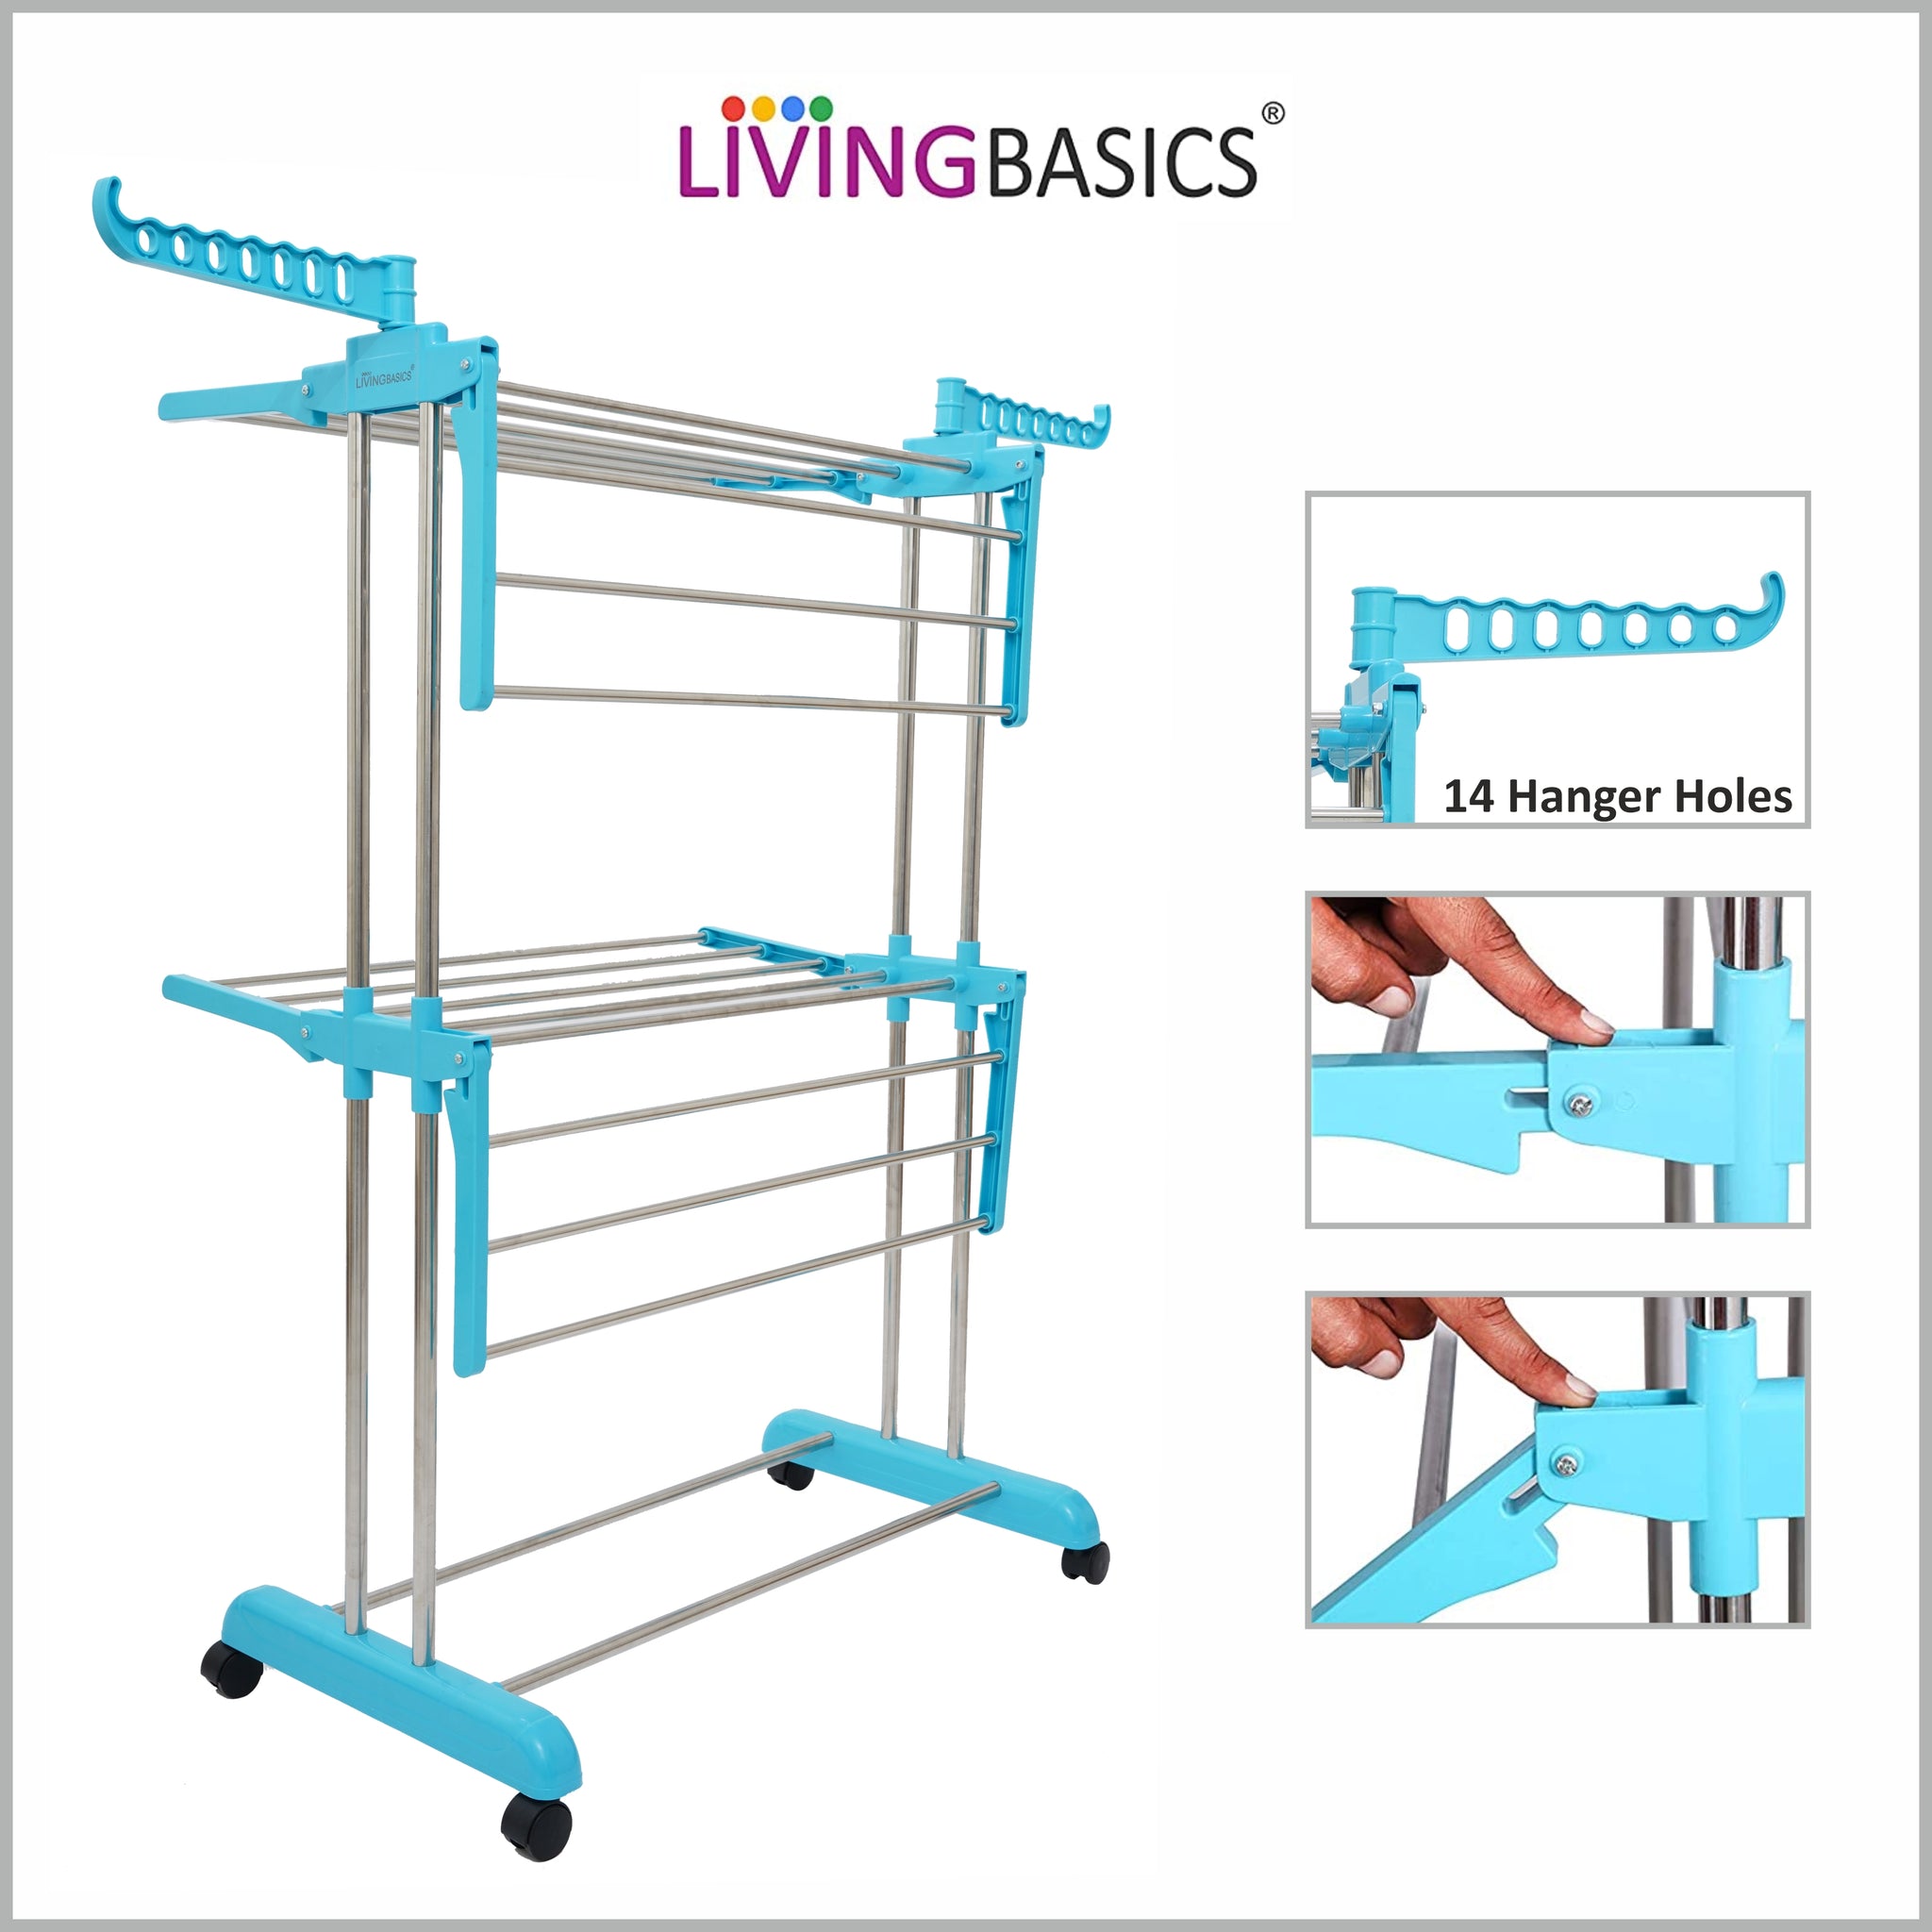 LIVINGBASICS Cloth Drying Stand Rust-Free Stainless Steel & ABS 2 Layer Foldable Clothes Dryer Rack / Folding Laundry Dry Stands with Wheels for Home / Indoor / Outdoor / Balcony (Cyan Blue)